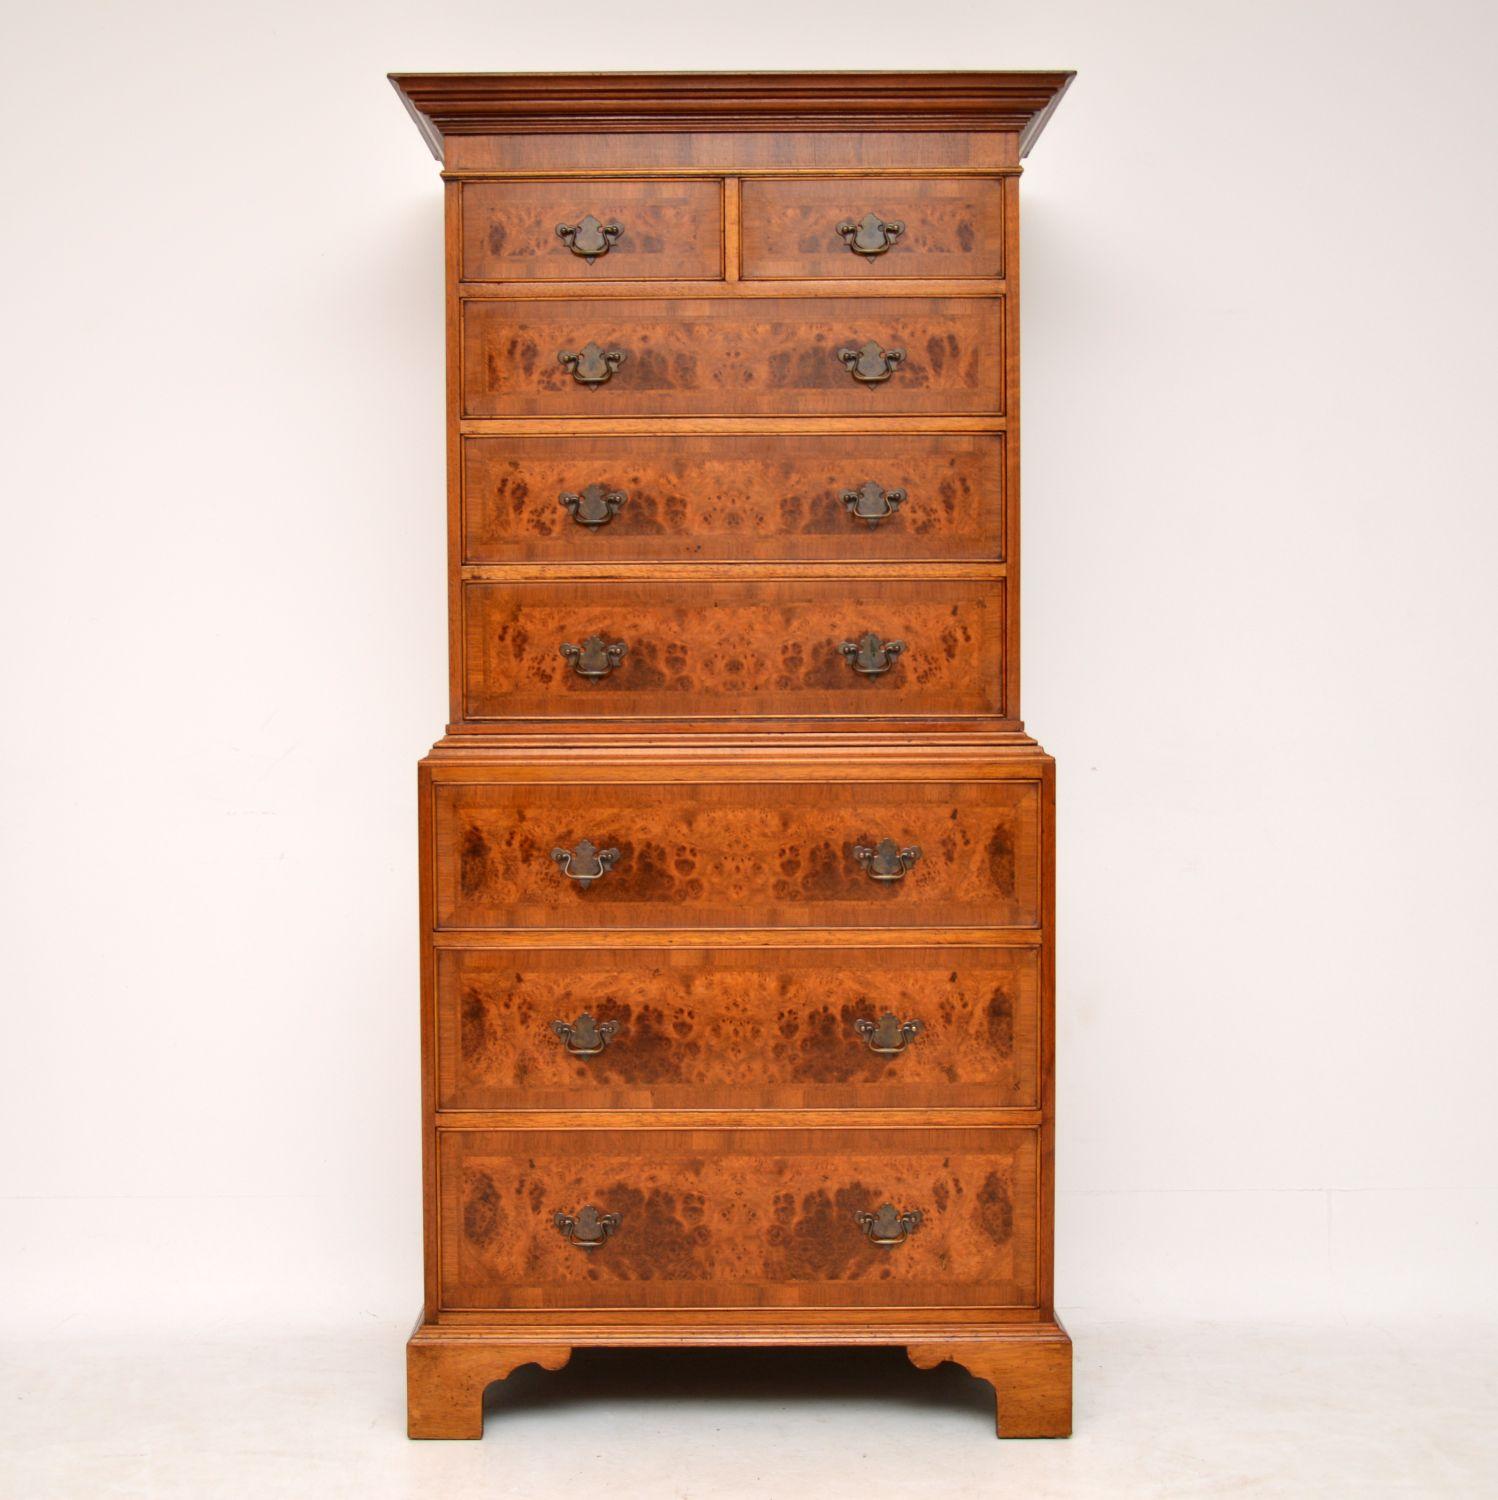 Large antique Georgian style burr walnut chest on chest in excellent condition and of fine quality, dating to circa 1950s period. The drawers are burr walnut with herringbone inlays and cross banded on the edges. They are all graduated in depth,